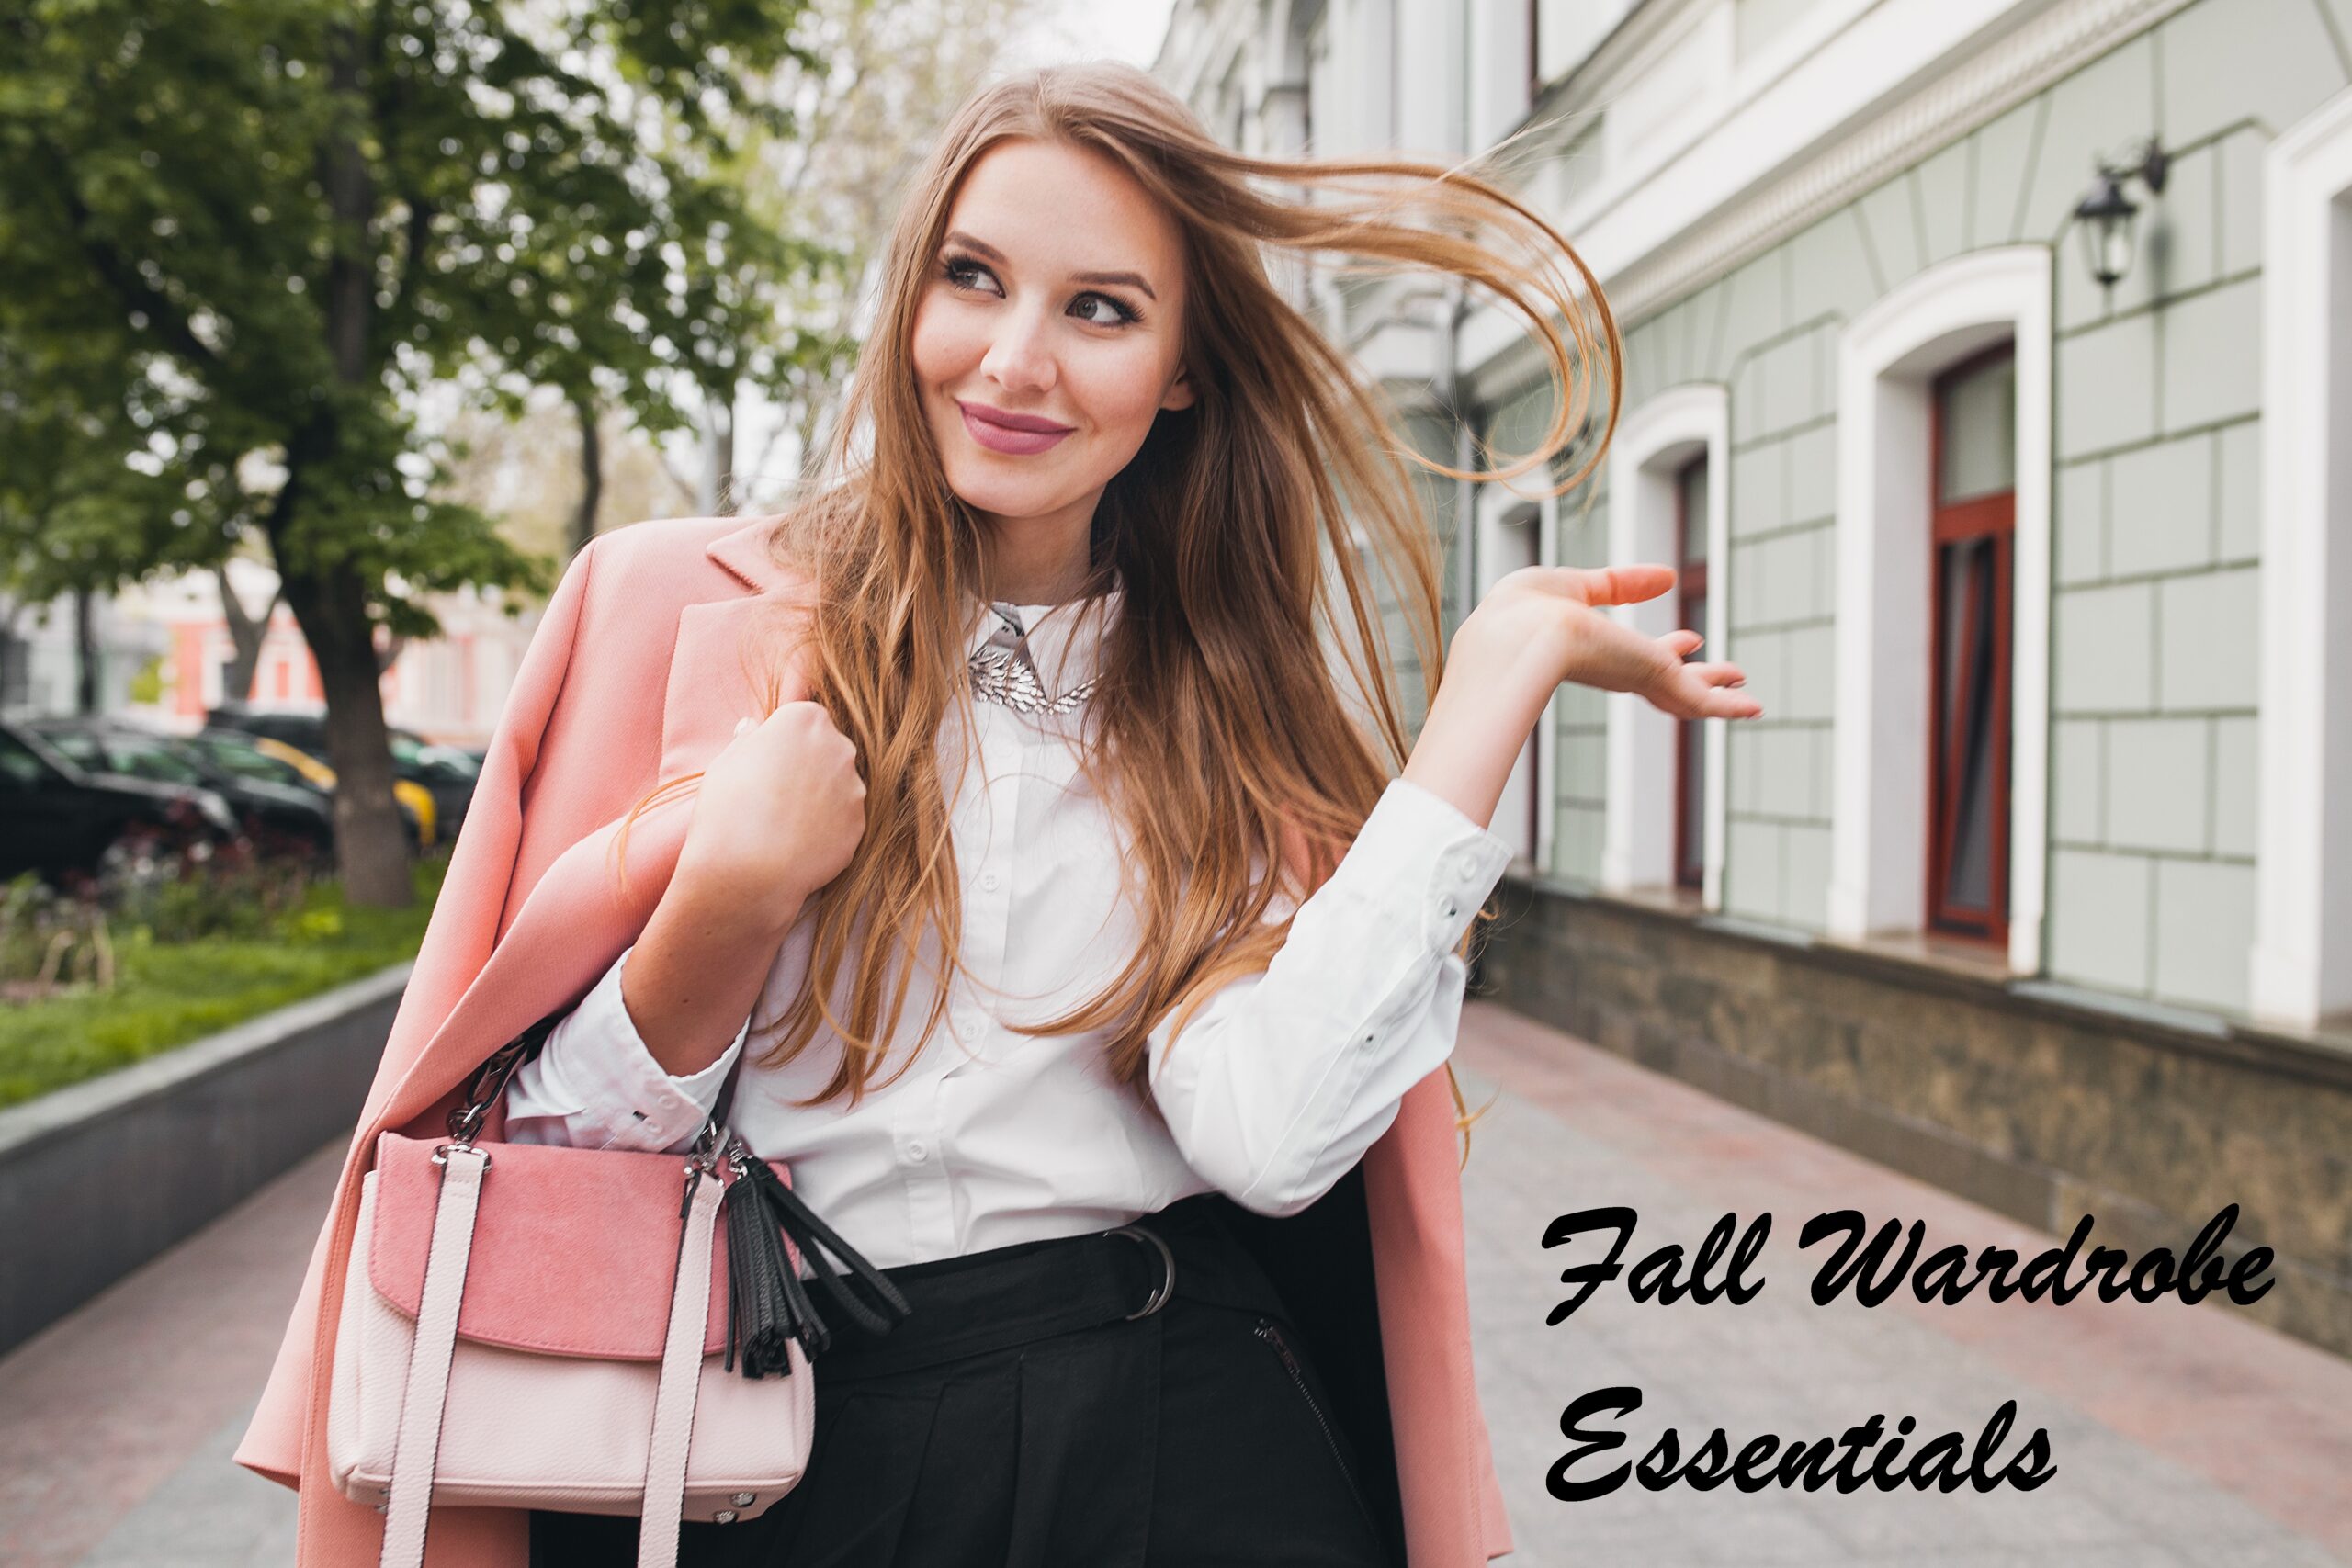 You are currently viewing Fall Wardrobe Essentials !